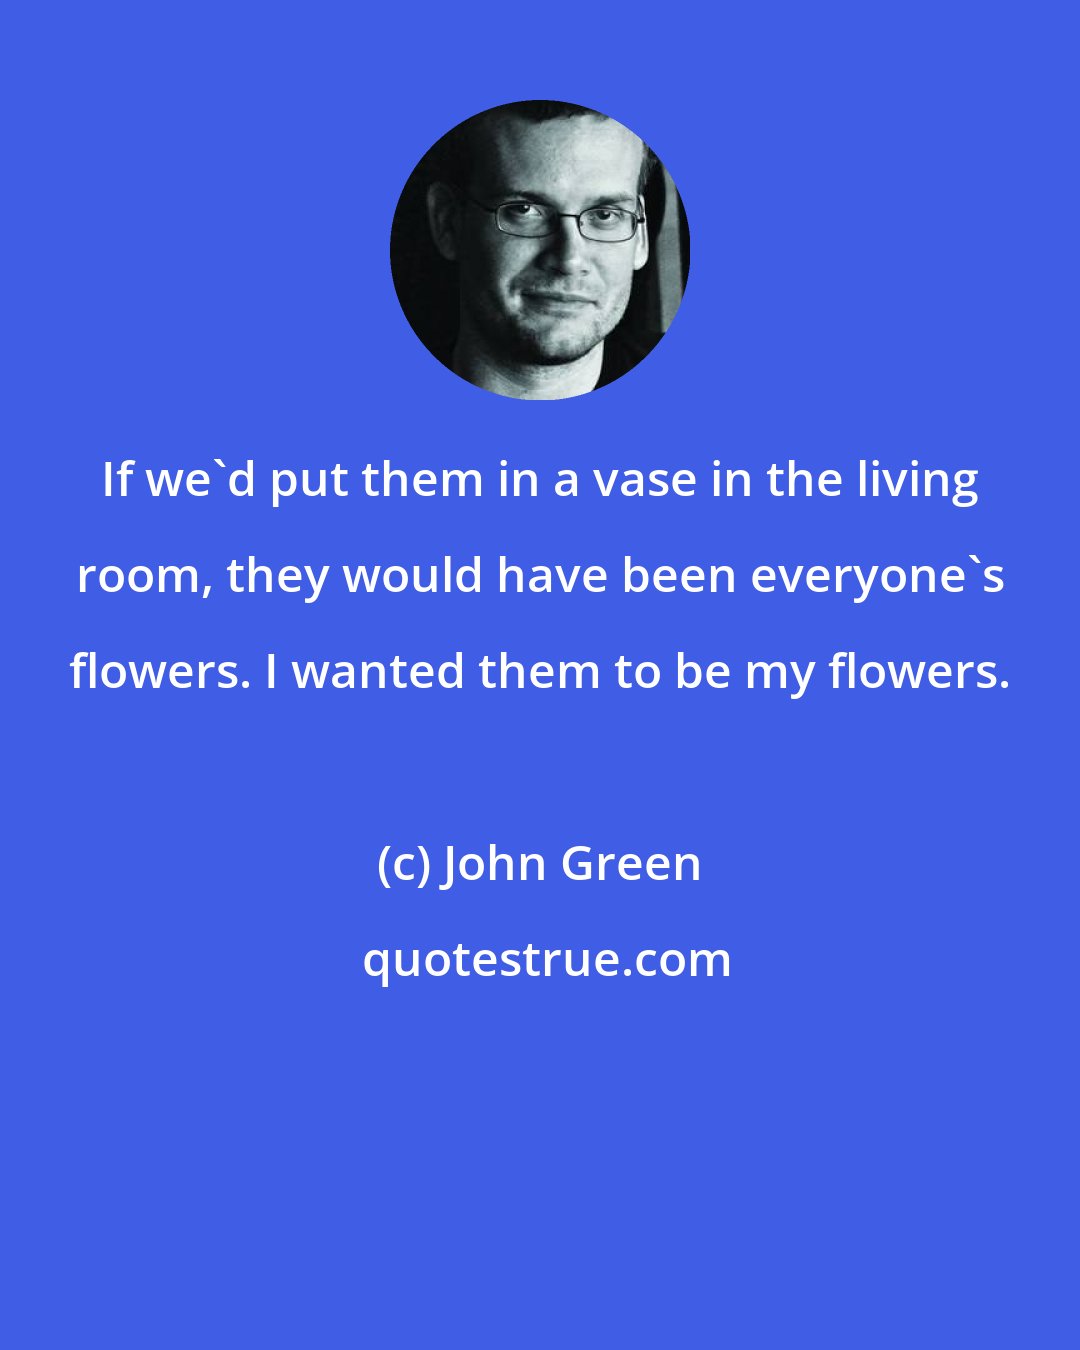 John Green: If we'd put them in a vase in the living room, they would have been everyone's flowers. I wanted them to be my flowers.